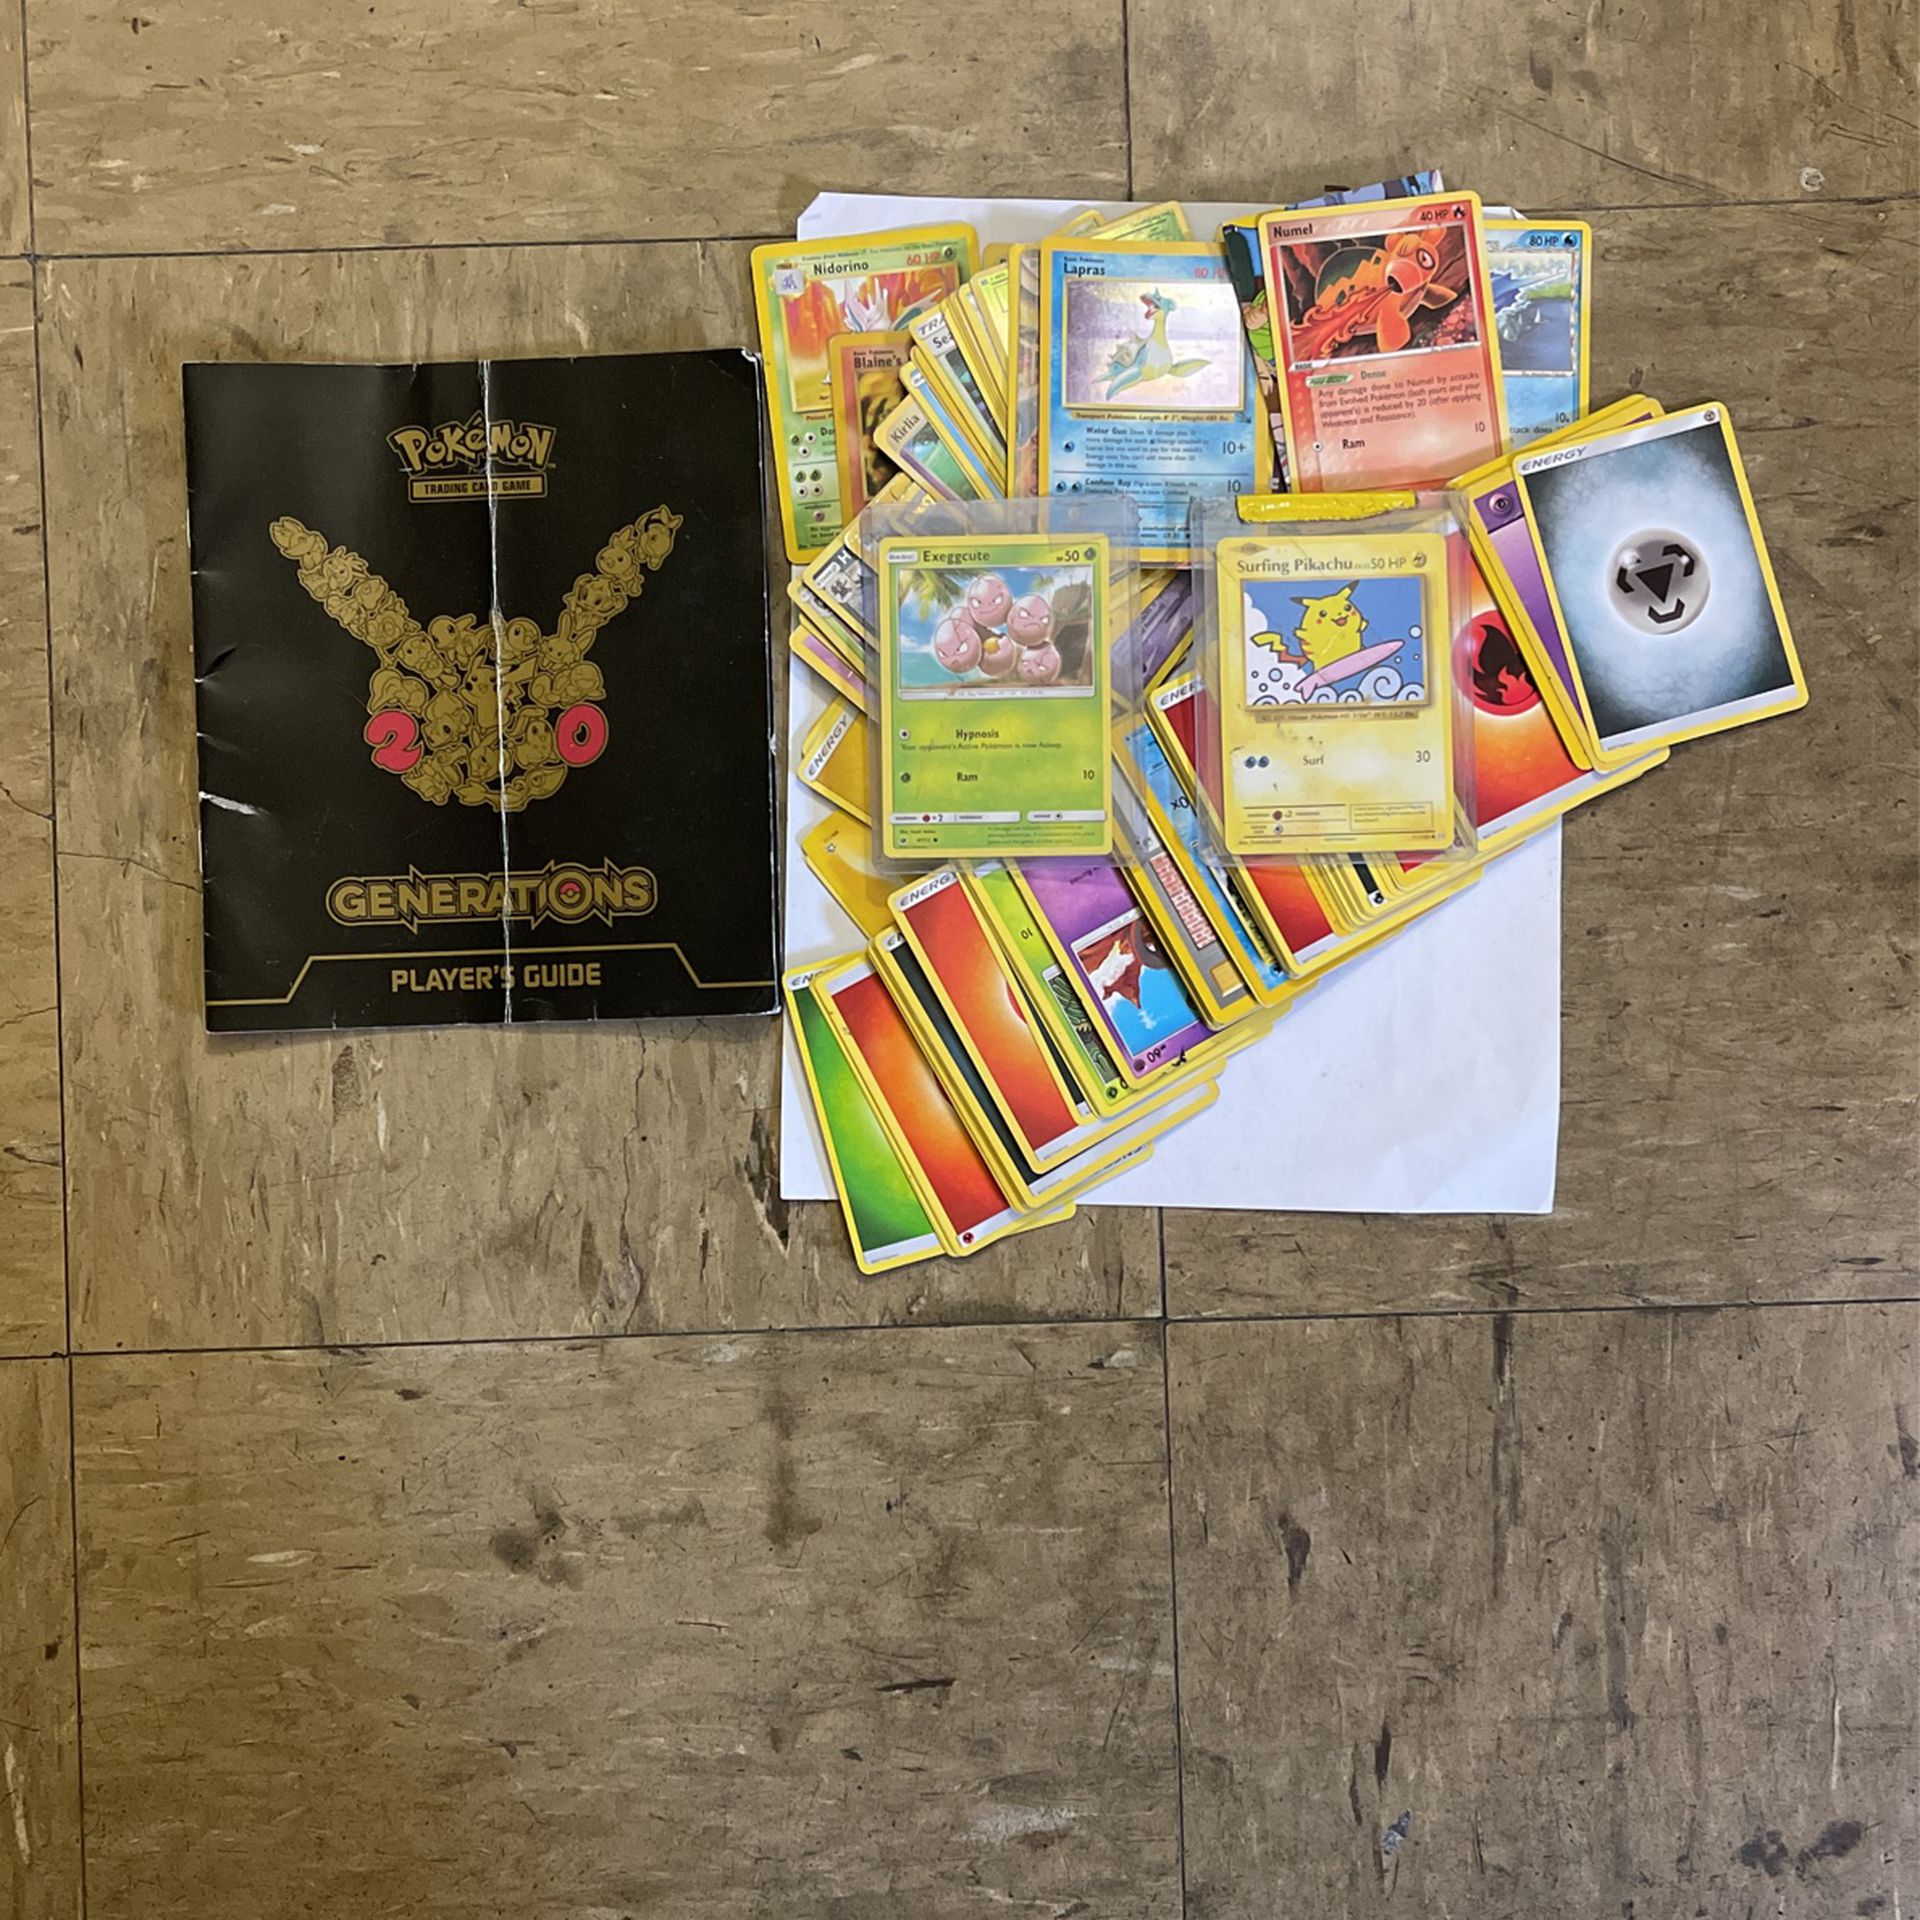 Classic Pokémon cards And players guide book